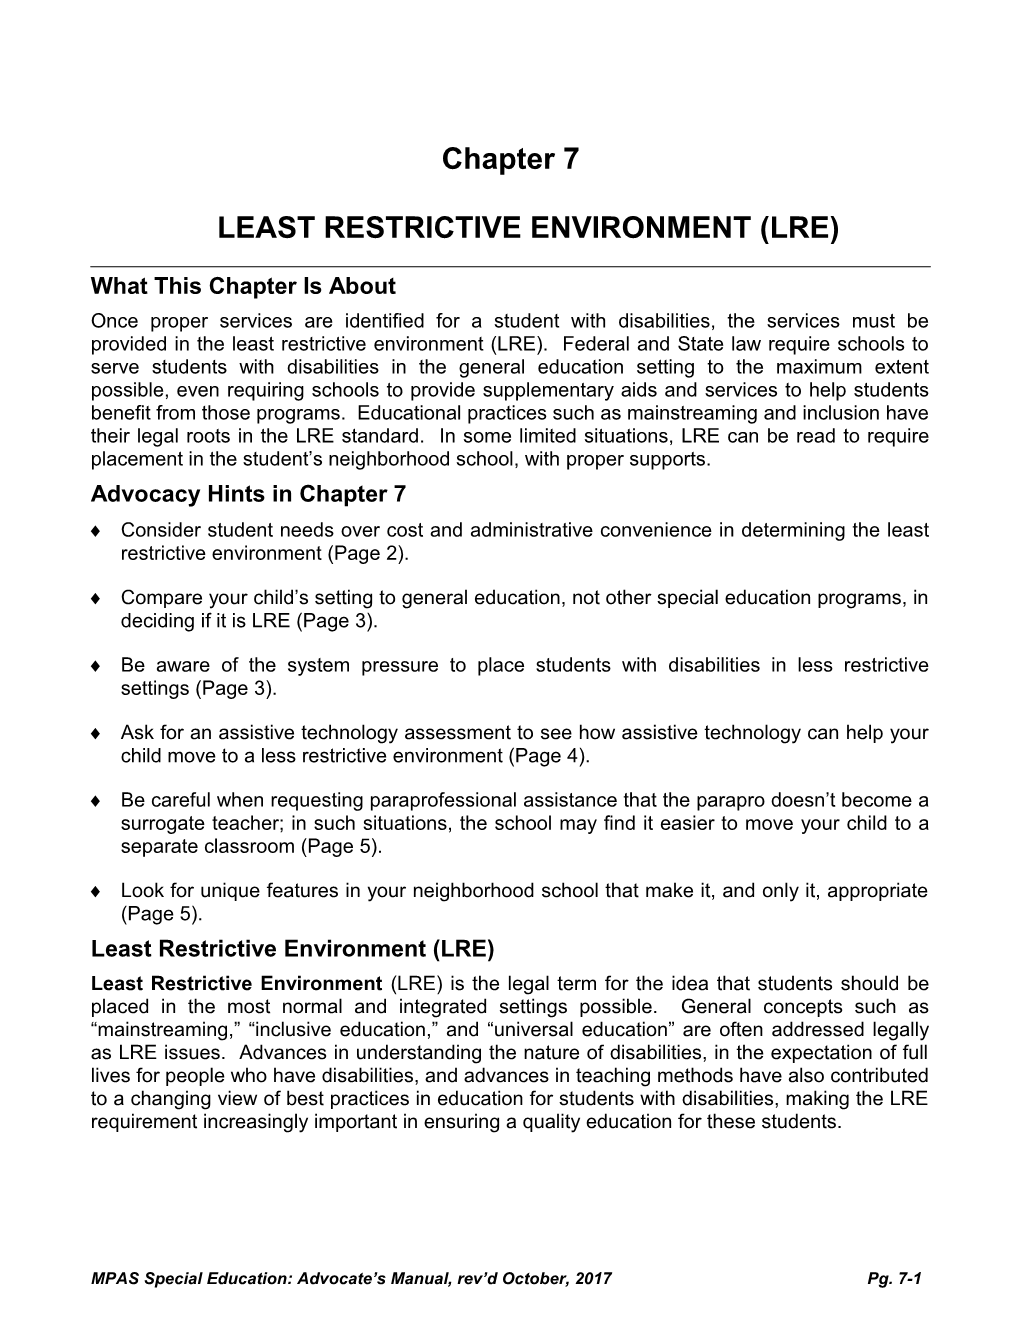 Chapter 7LEAST RESTRICTIVE ENVIRONMENT (LRE)